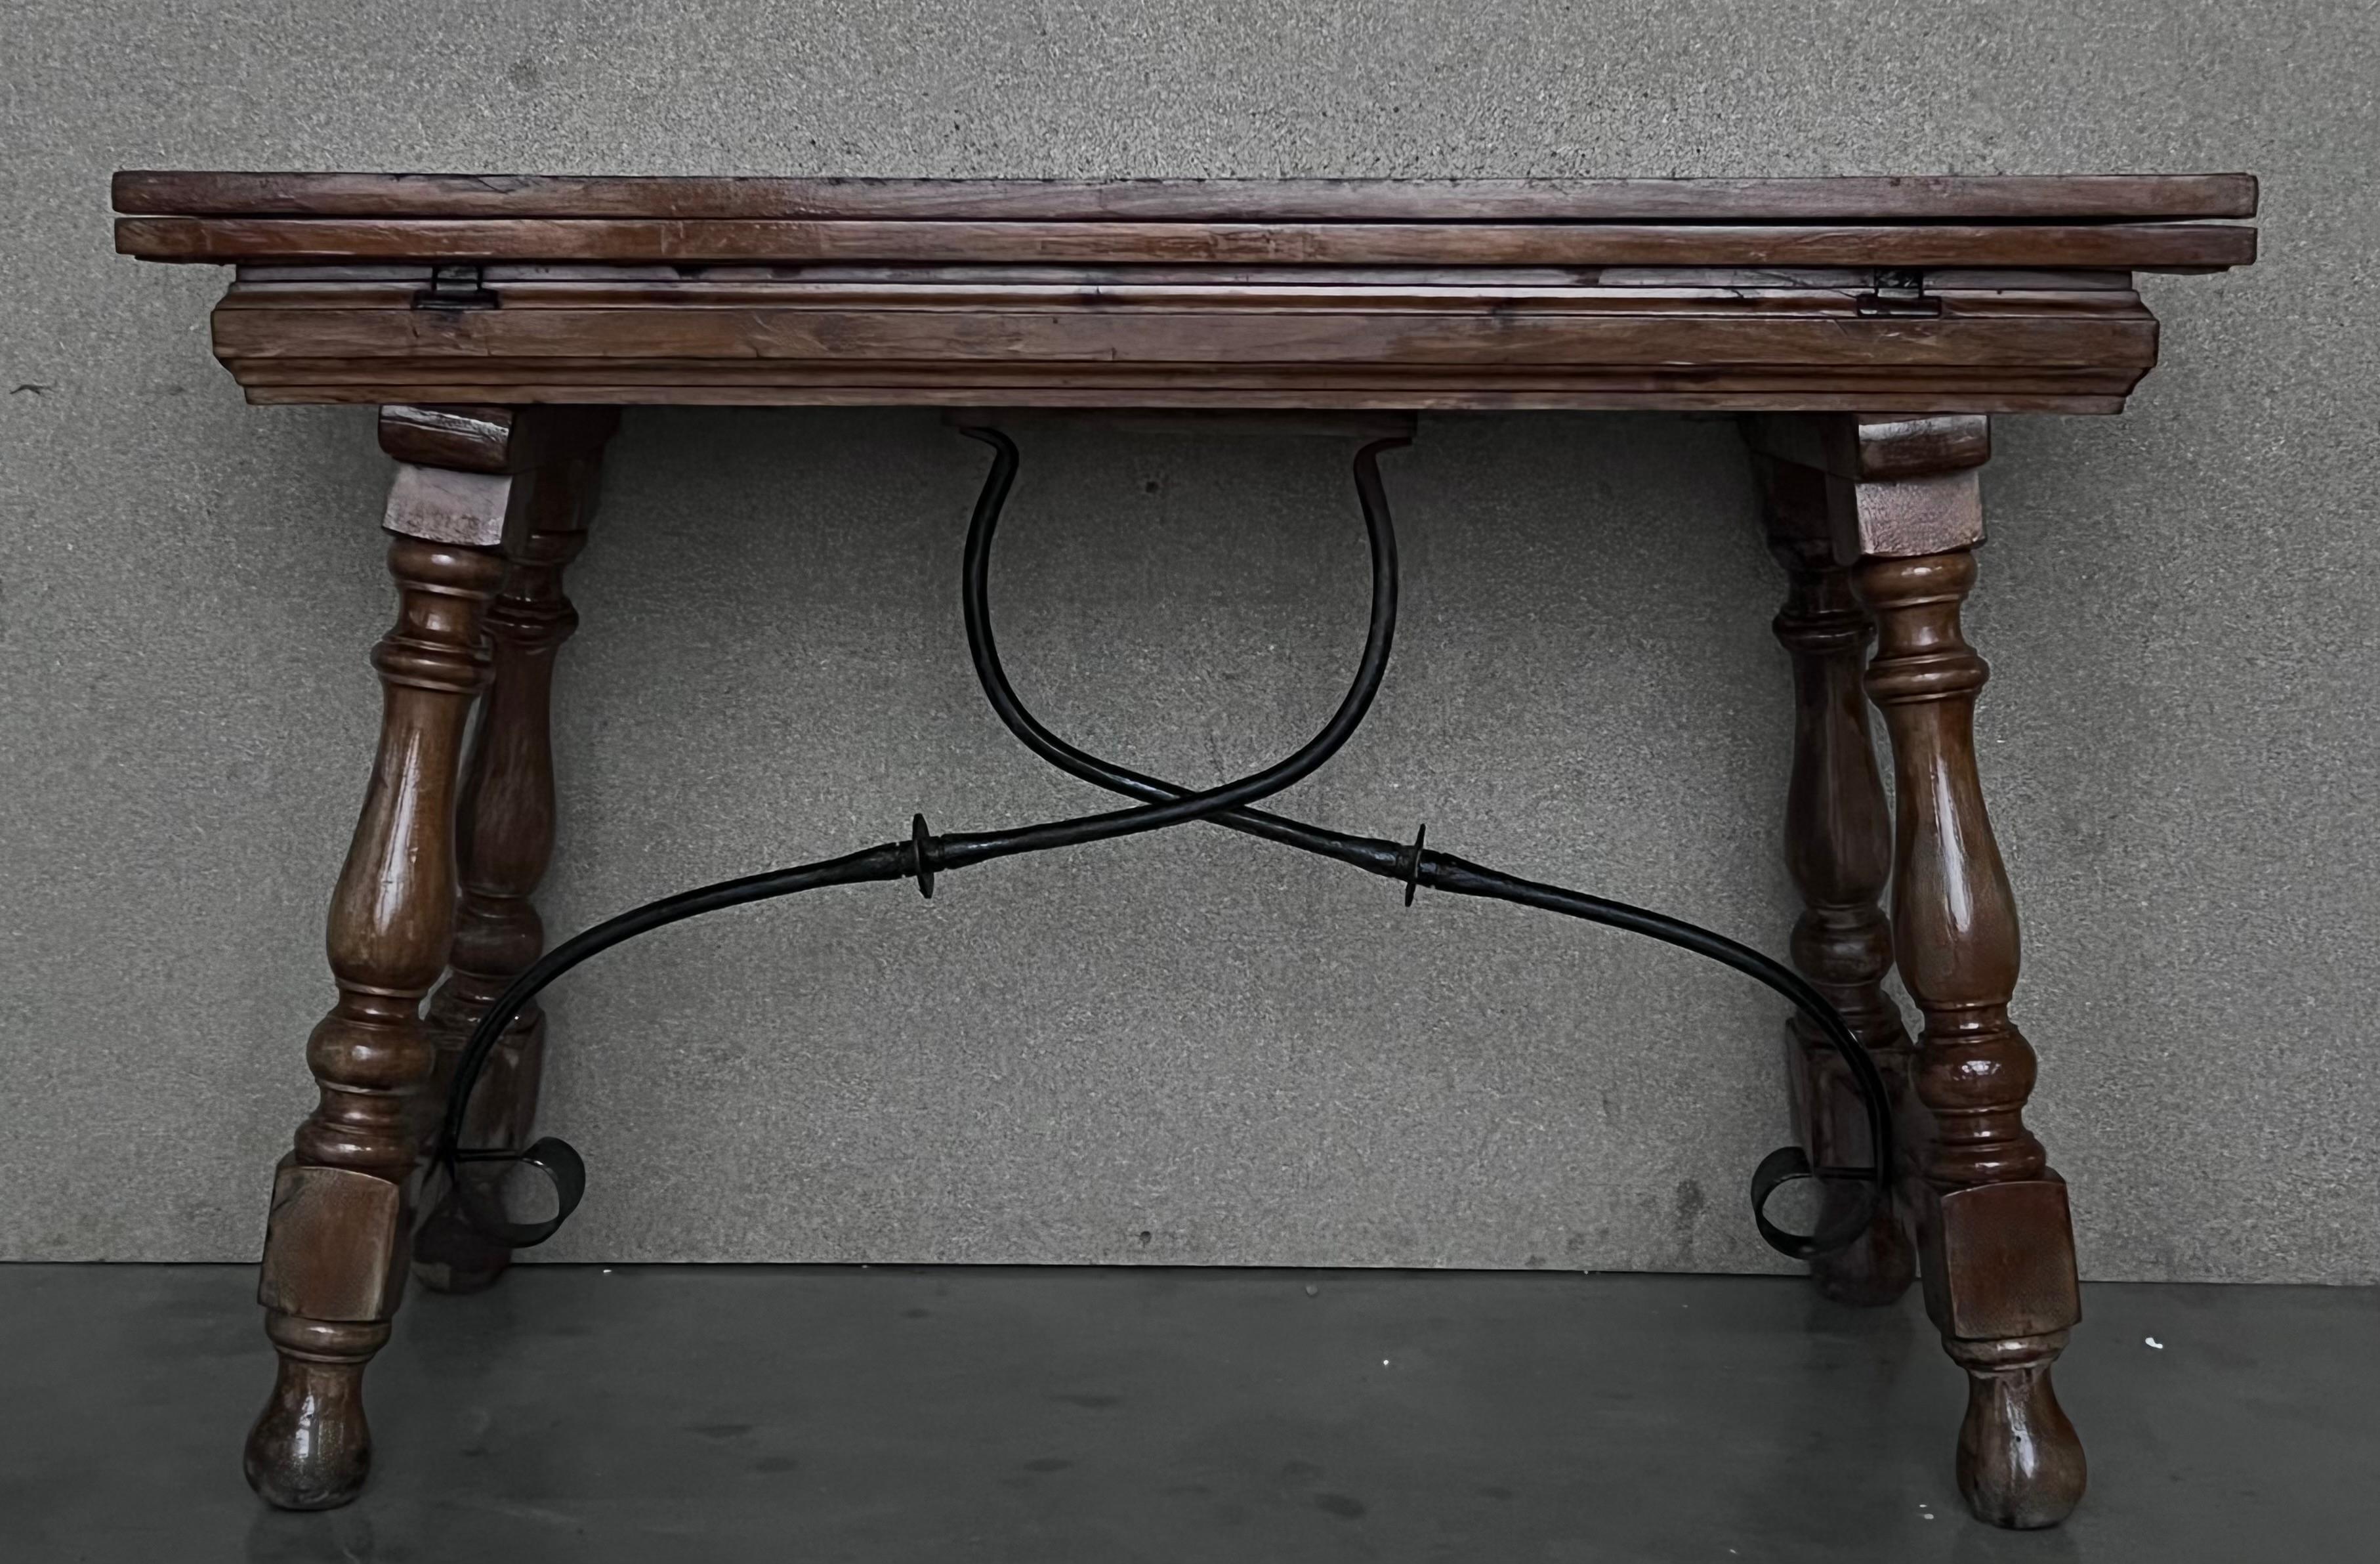 20th century Spanish console fold out farm table
Works as both a dining table and console.
Measure extended : 31.49in.